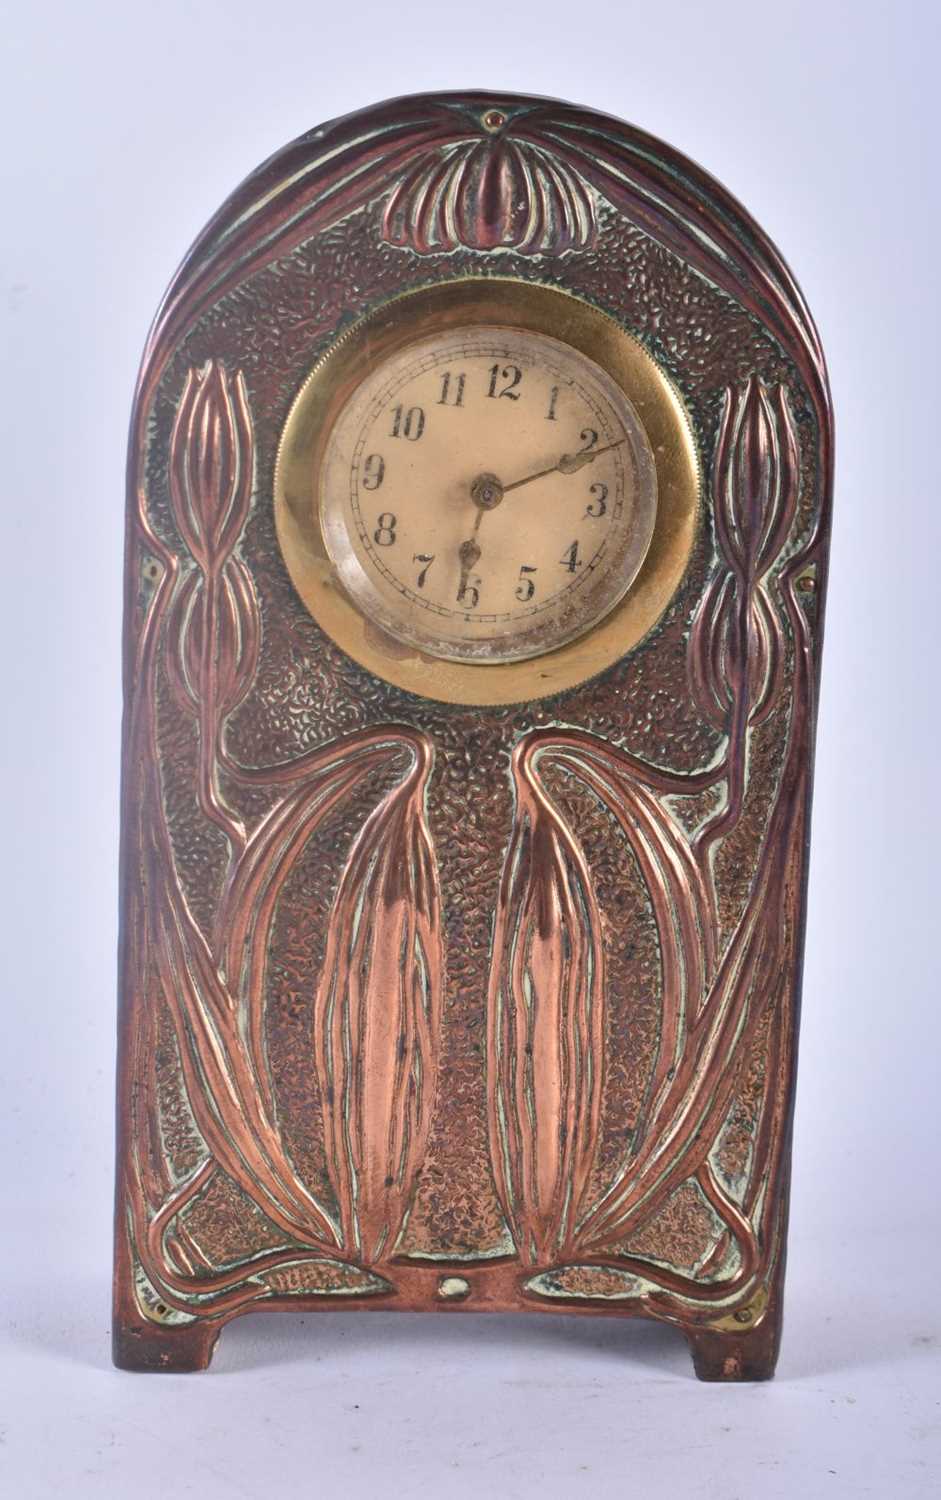 AN ART NOUVEAU COPPER REPOUSSE MANTEL CLOCK decorated in relief with floral vines and drapes. 20